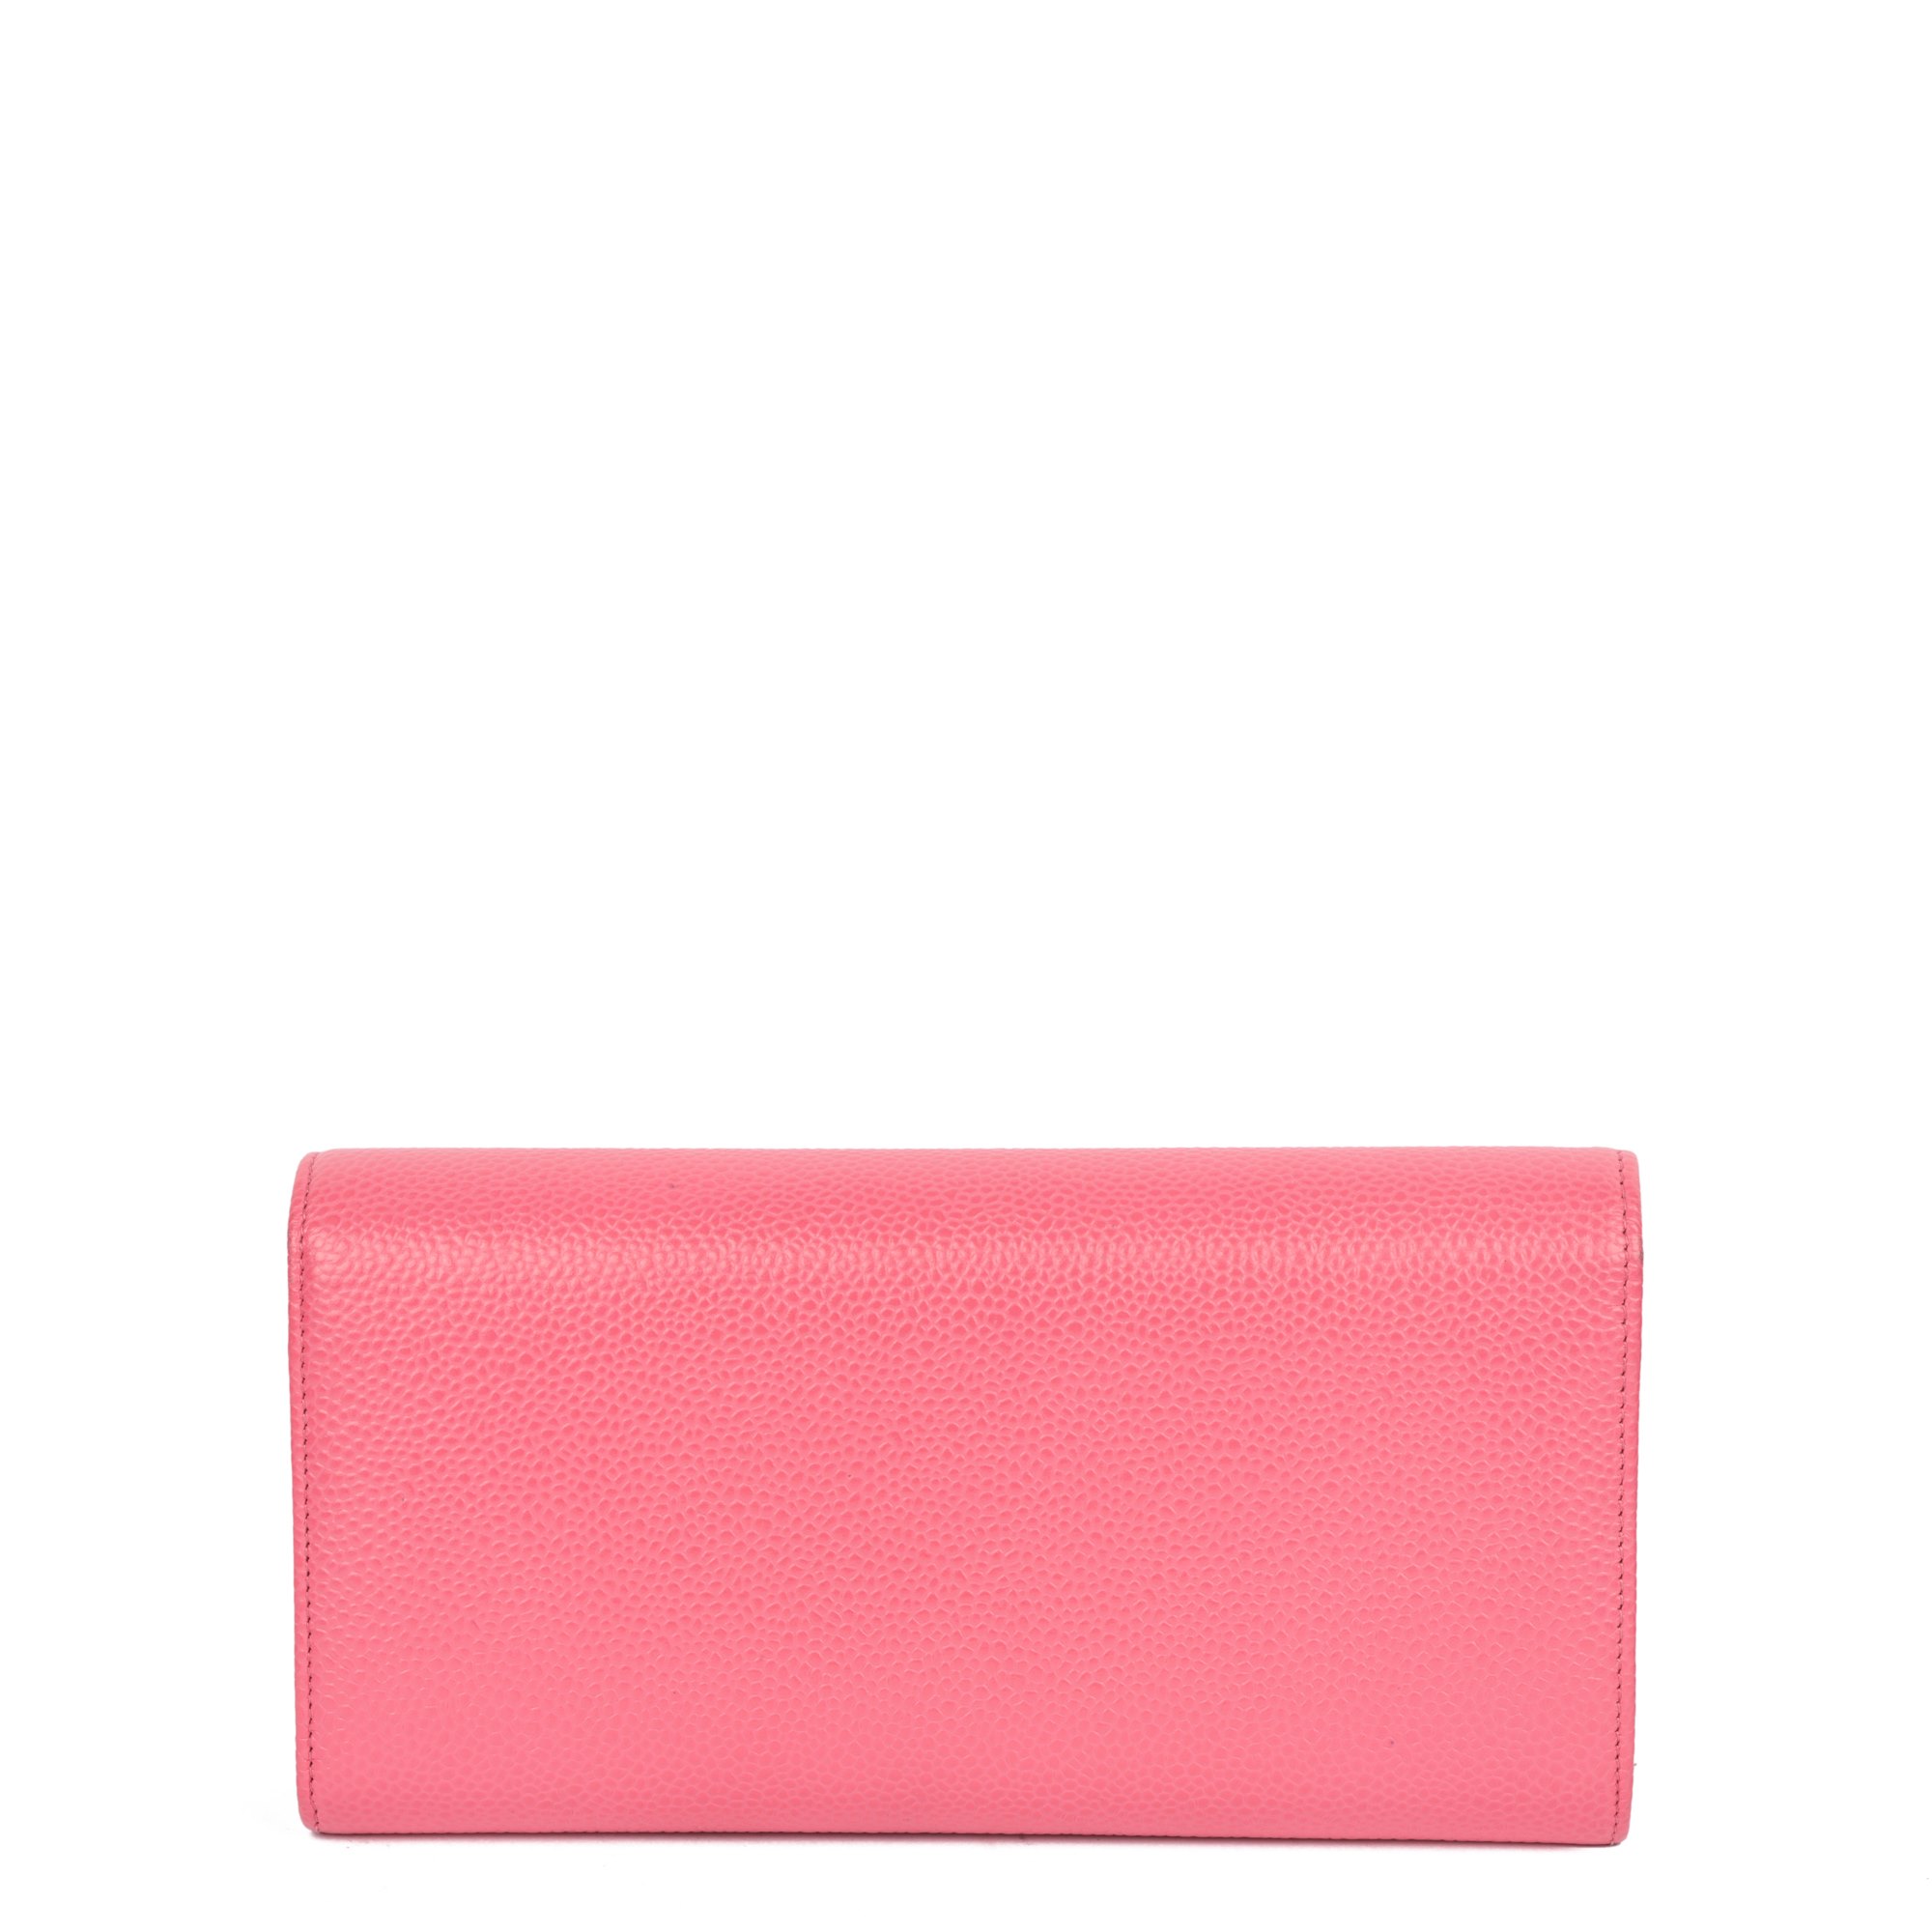 Chanel Pink Caviar Leather Long Wallet